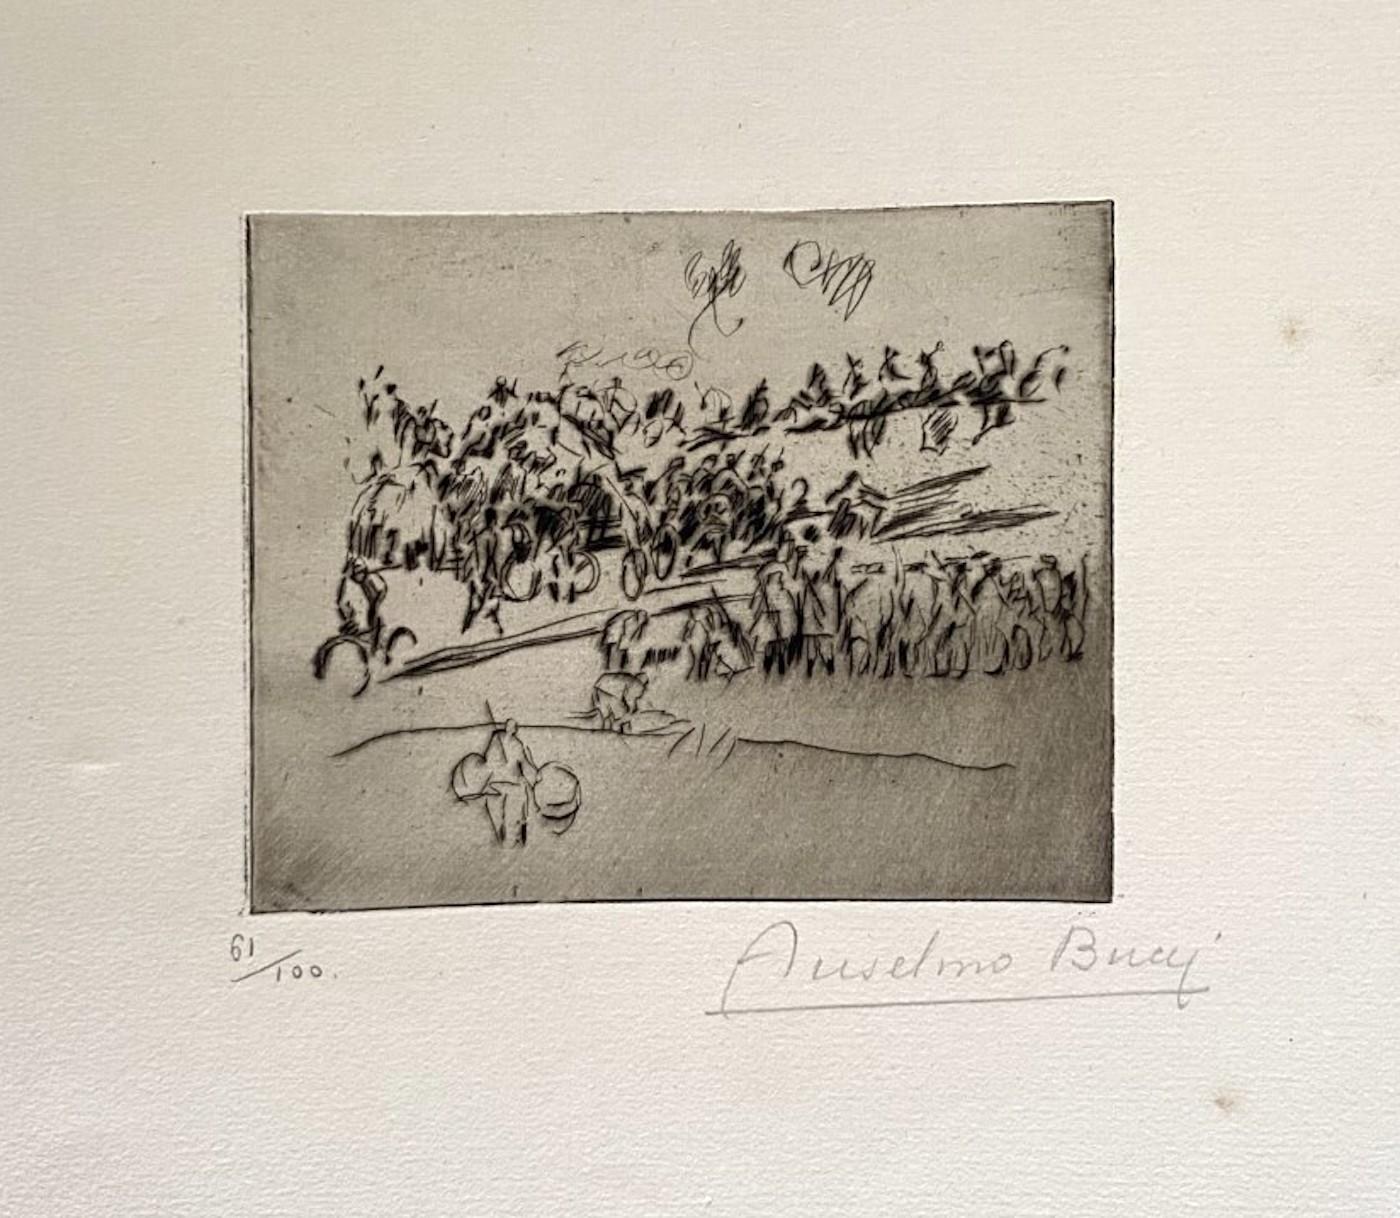 "Military" 1917s is a beautiful print in etching technique, realized by Anselmo Bucci (1887-1955).

Hand signed. Numbered 61/100 of prints on the lower left. On the lower left corner, an illegible iscription written in pencil.

Image Dimensions: